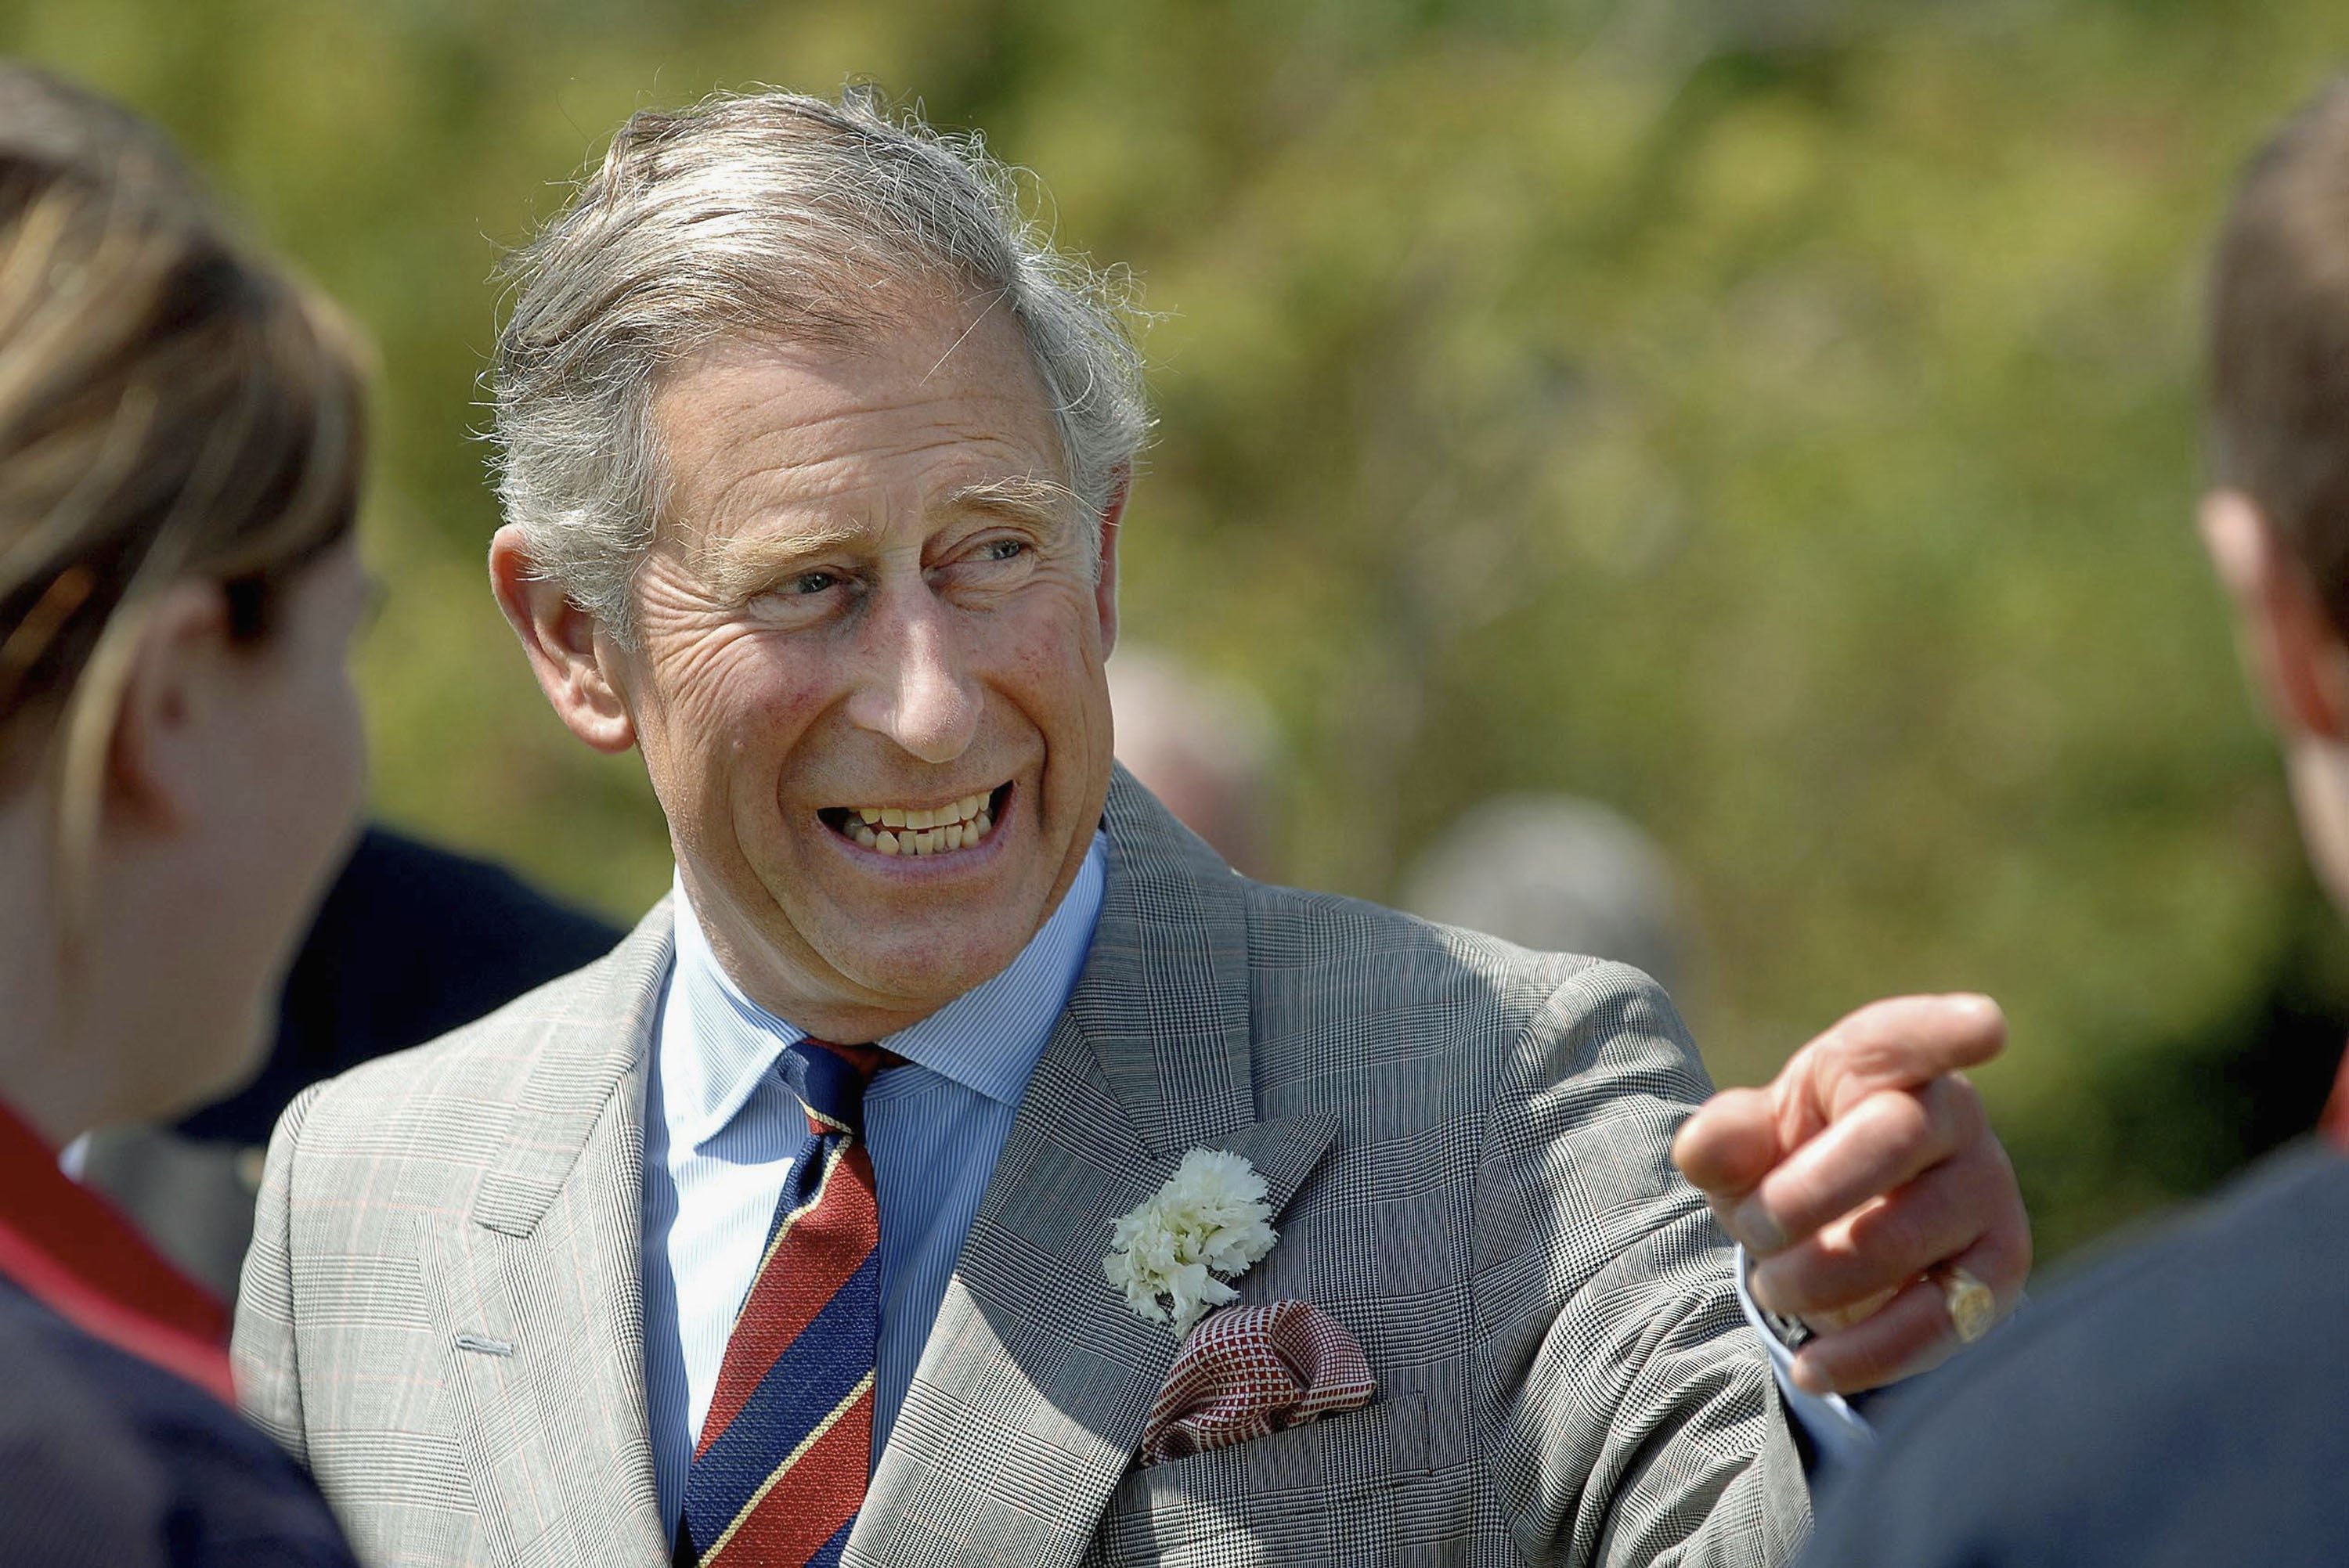 Prince Charles, Prince of Wales jokes with pupils from Ysgol Bodedern during a visit to Llynnon Mill, Llanddeusant on June 7, 2007 in Anglessey, Wales.  | Photo: GettyImages